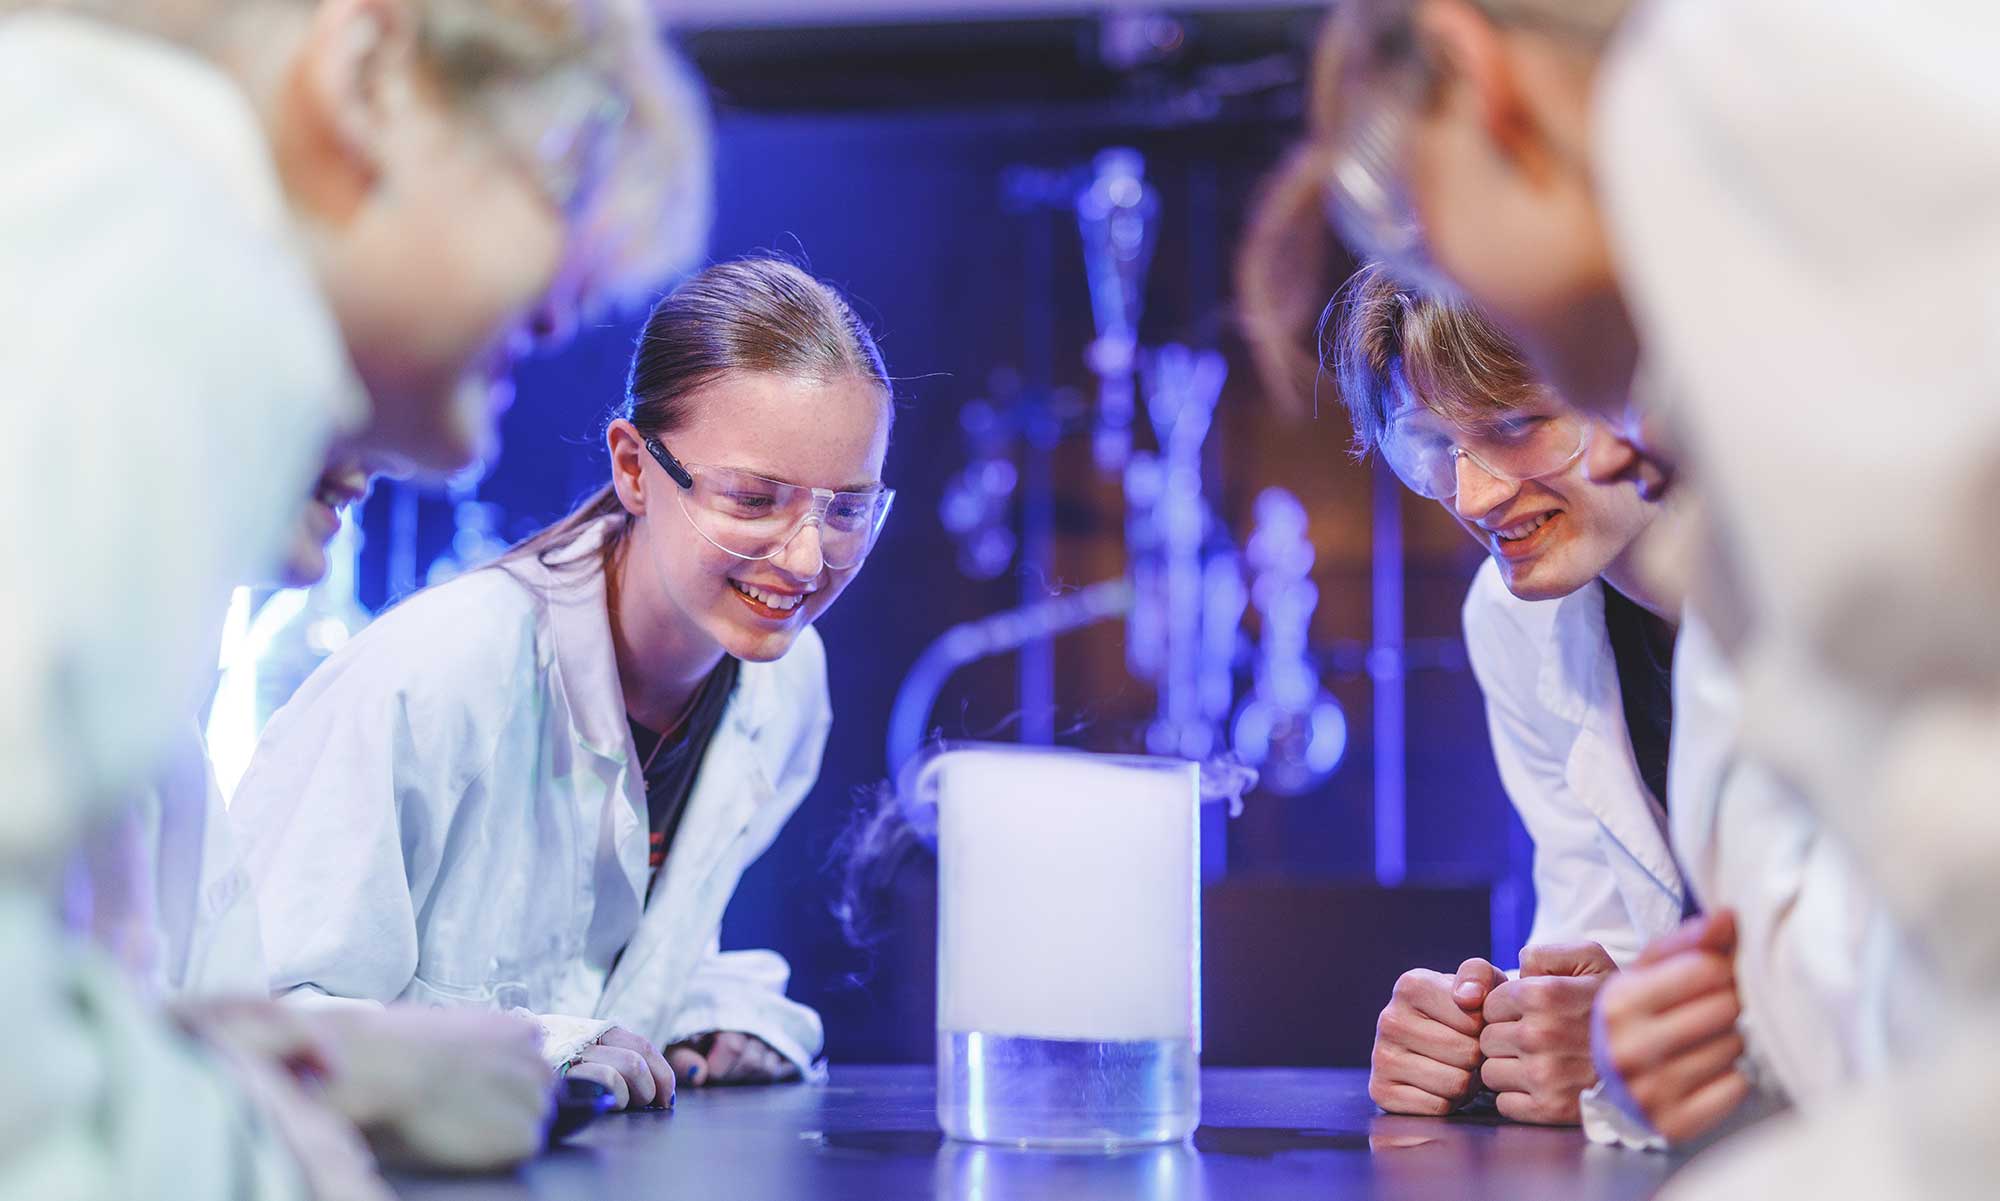 Students in a science environment  looking at smoke from a laboratory equipment.